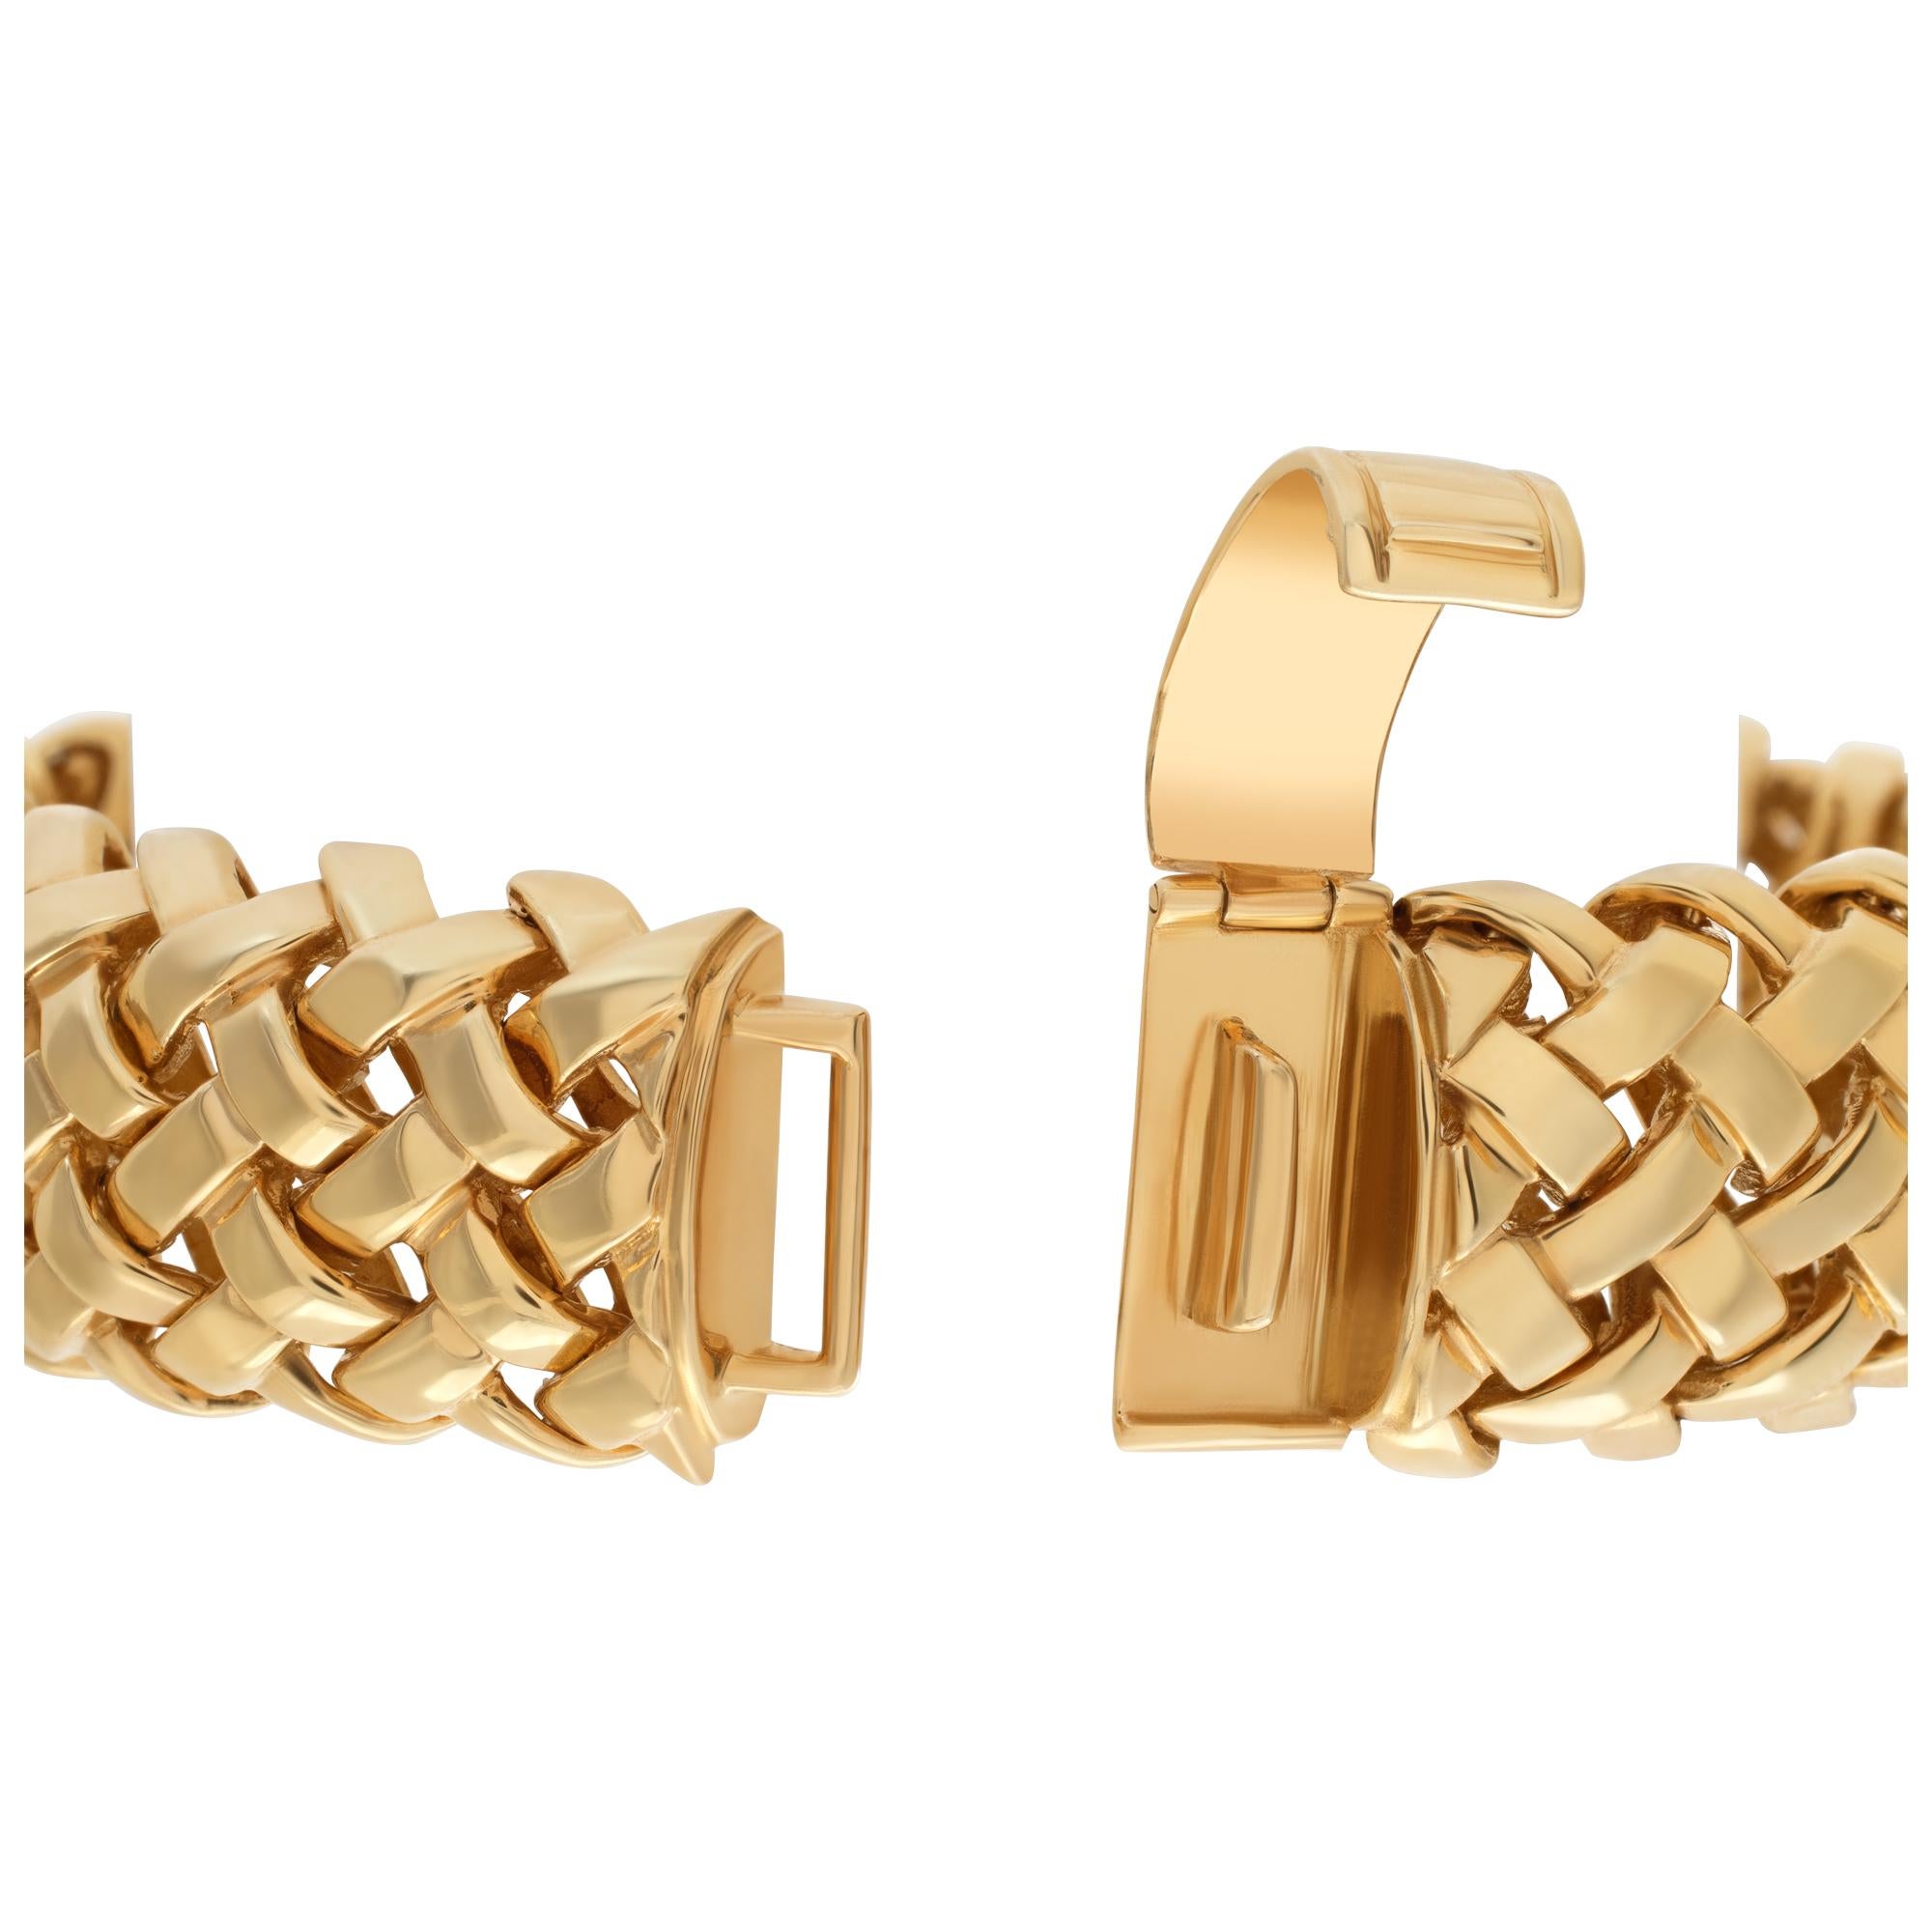 Tiffany & Co. VANNERIE Collection bracelet in 18K yellow gold 2